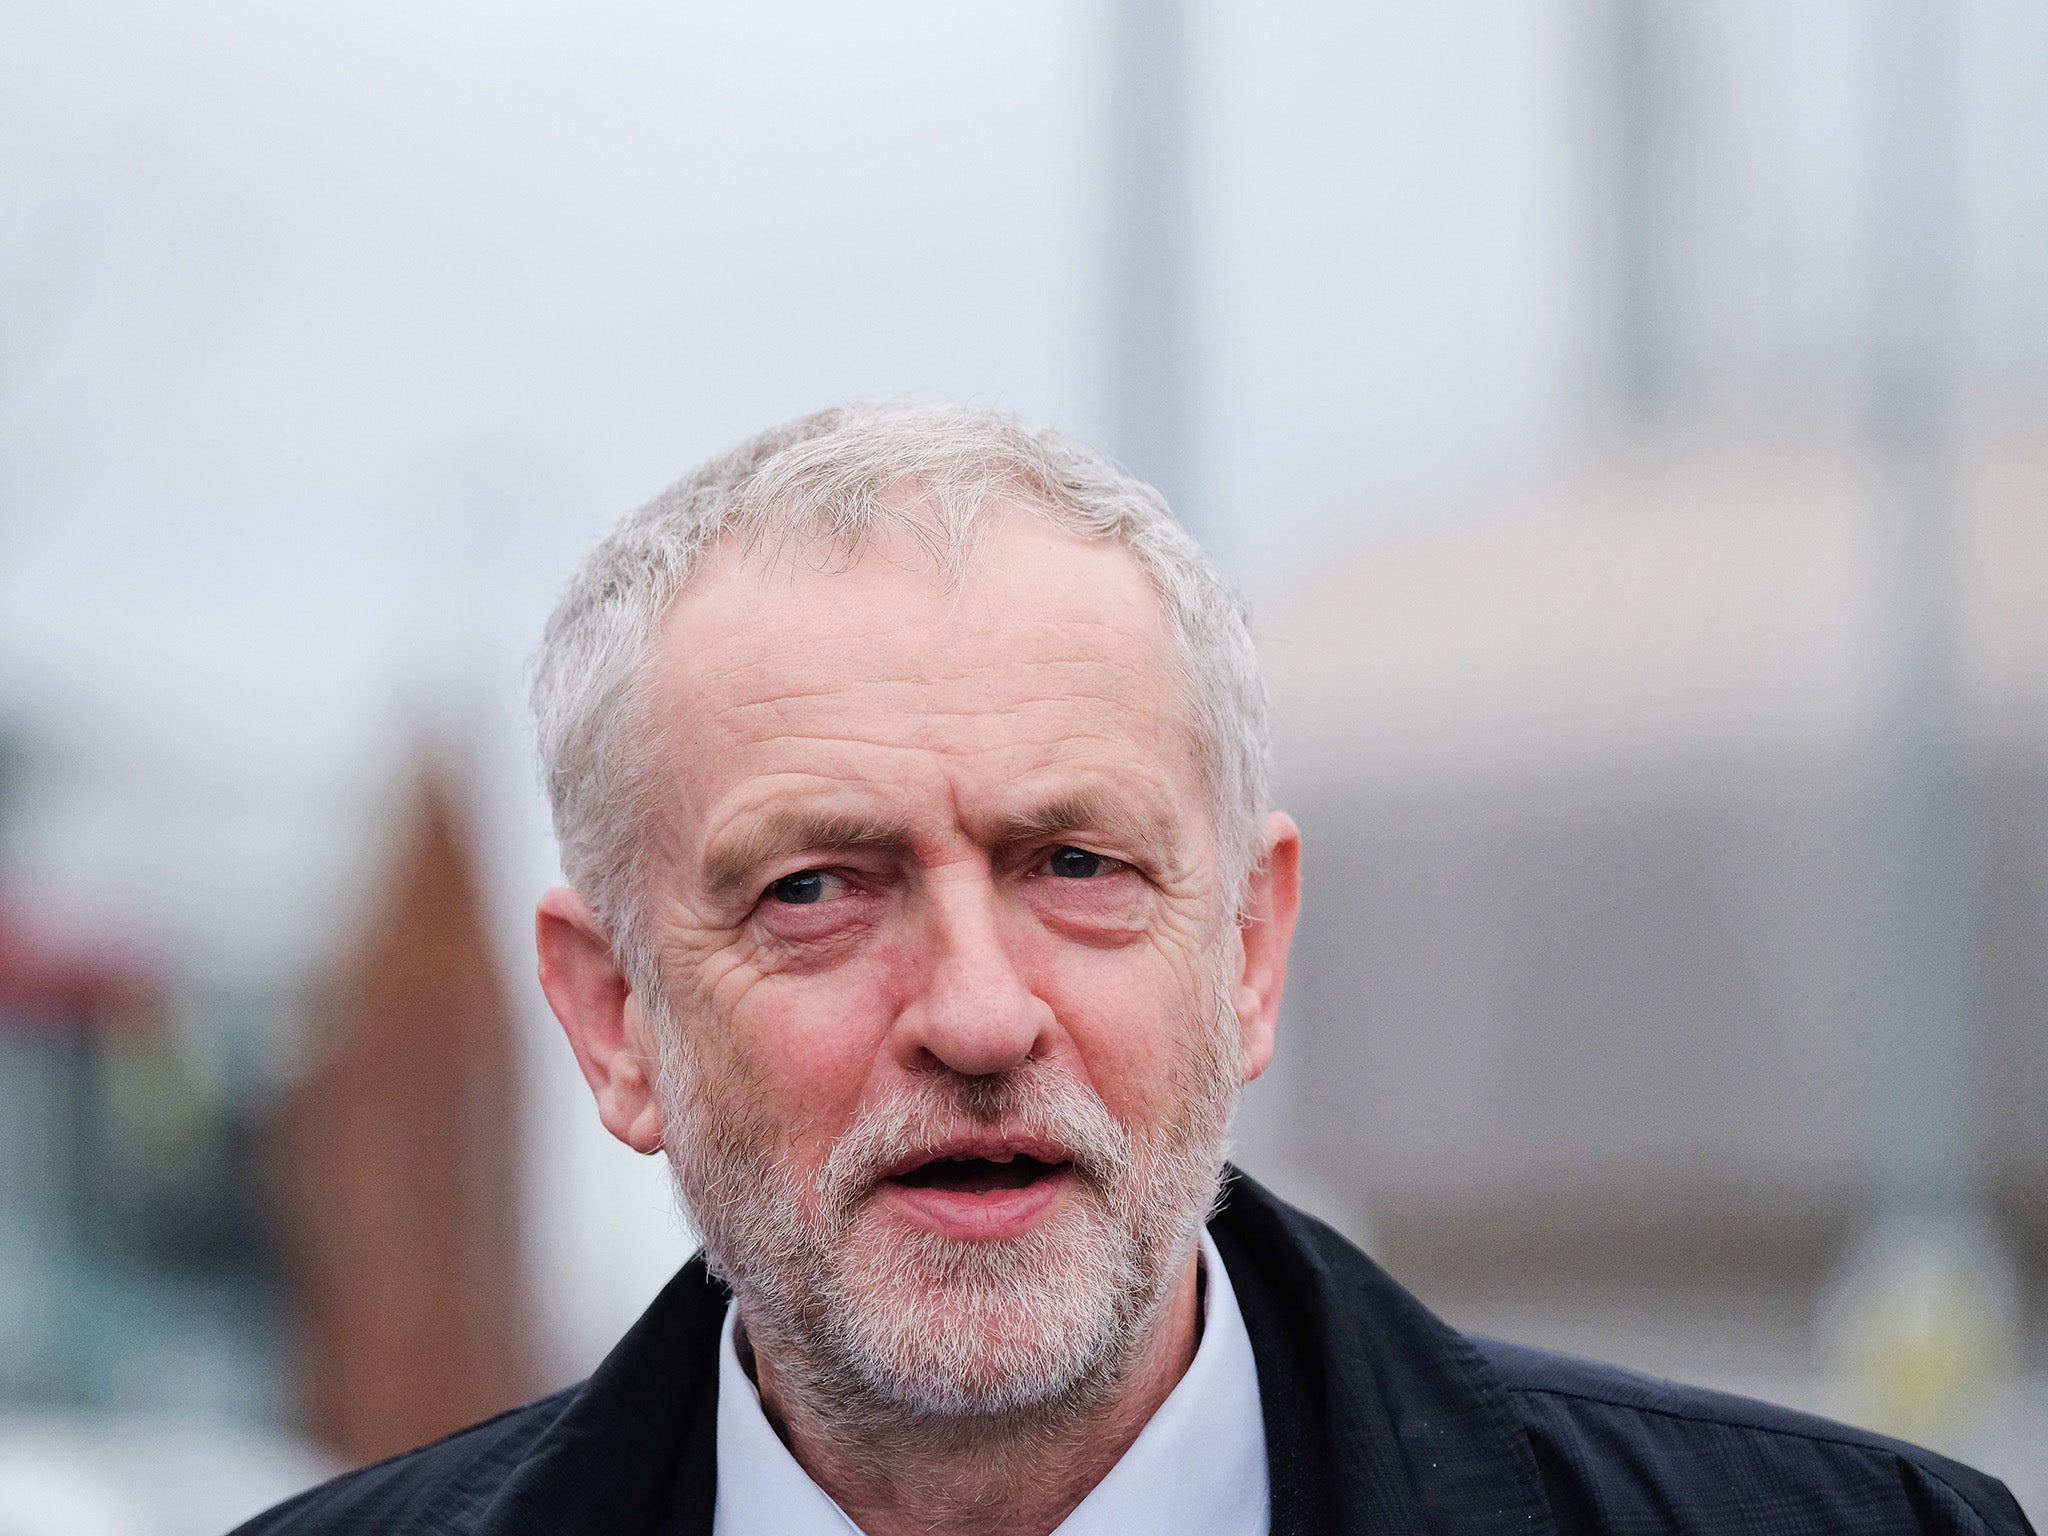 Jeremy Corbyn will have a fight on his hands if Labour does not do well in the first major test of his leadership